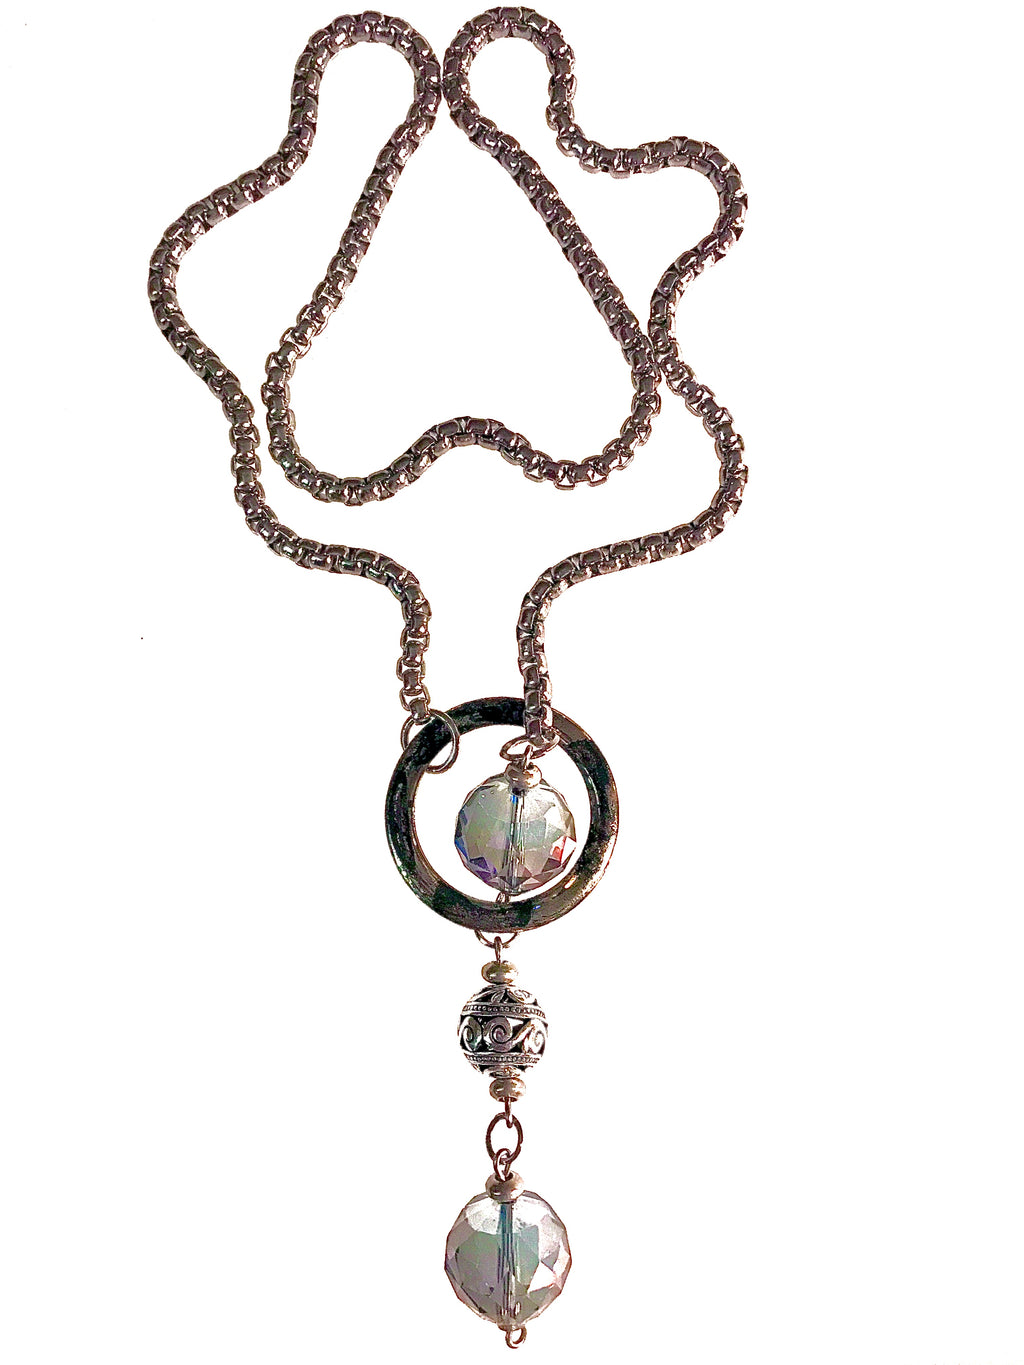 Shown on a white background: a lariat style necklace made of thick stainless steel chain and a distressed metal circle through which two chunky, iridescent crystal beads and a metal bead dangle.